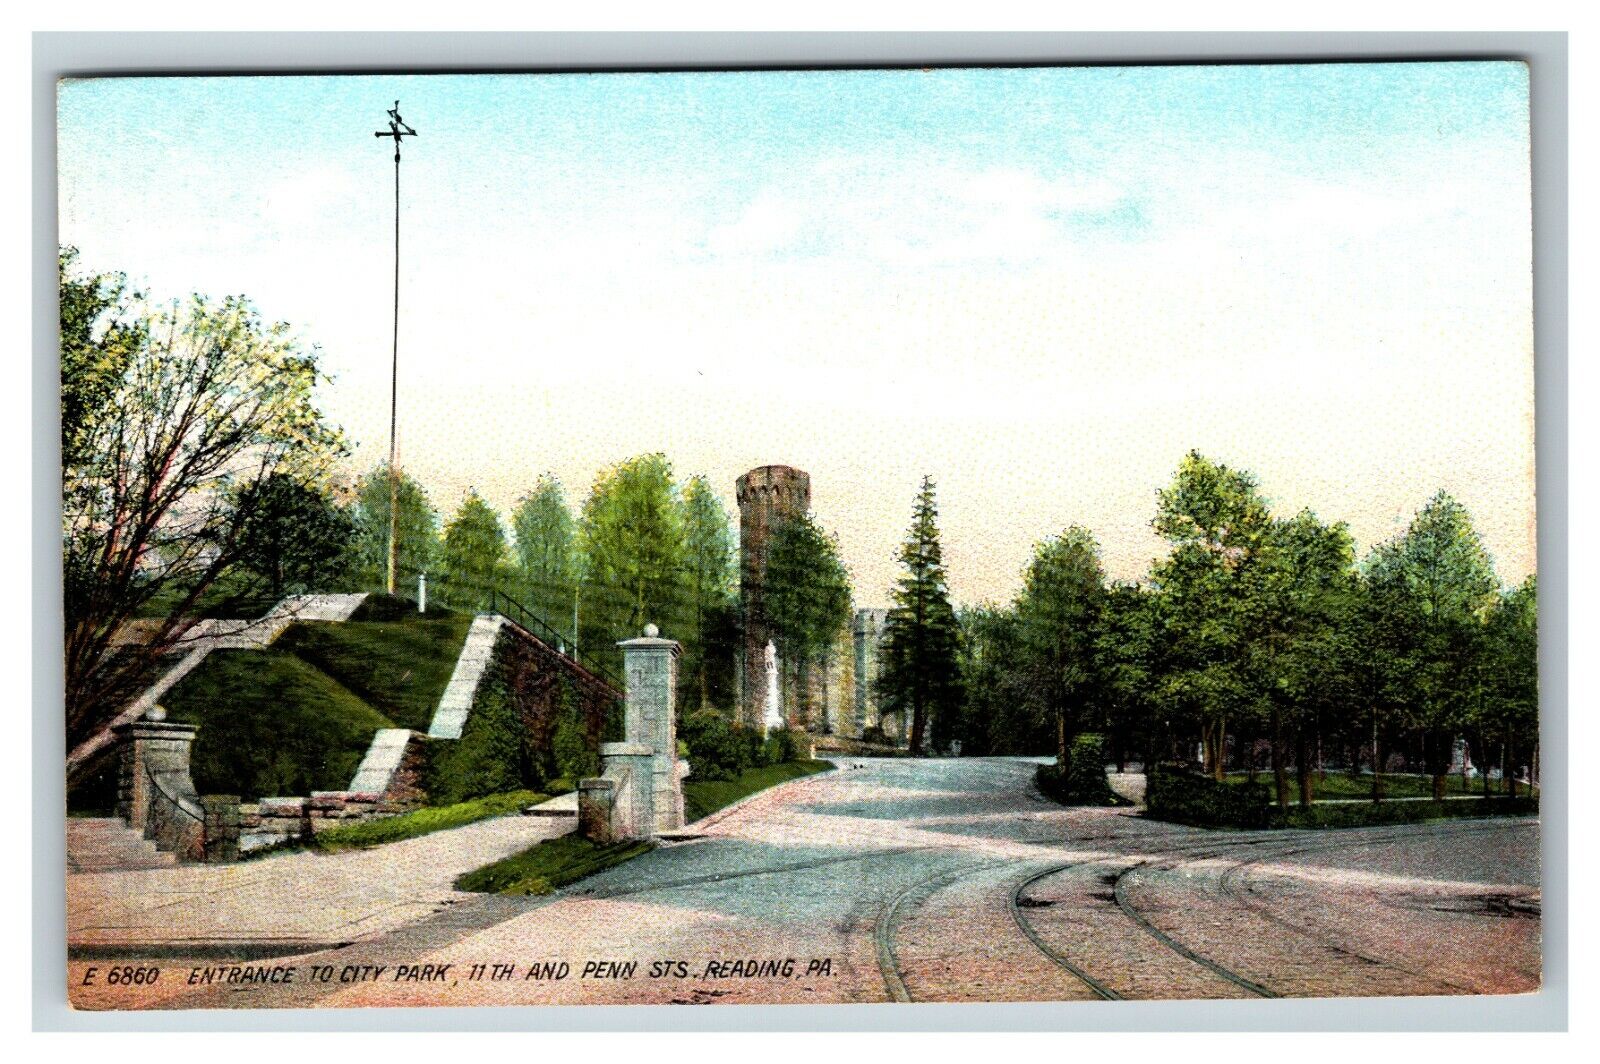 Entrance to City Park, 11th and Penn St., Reading PA c1910 Vintage Postcard